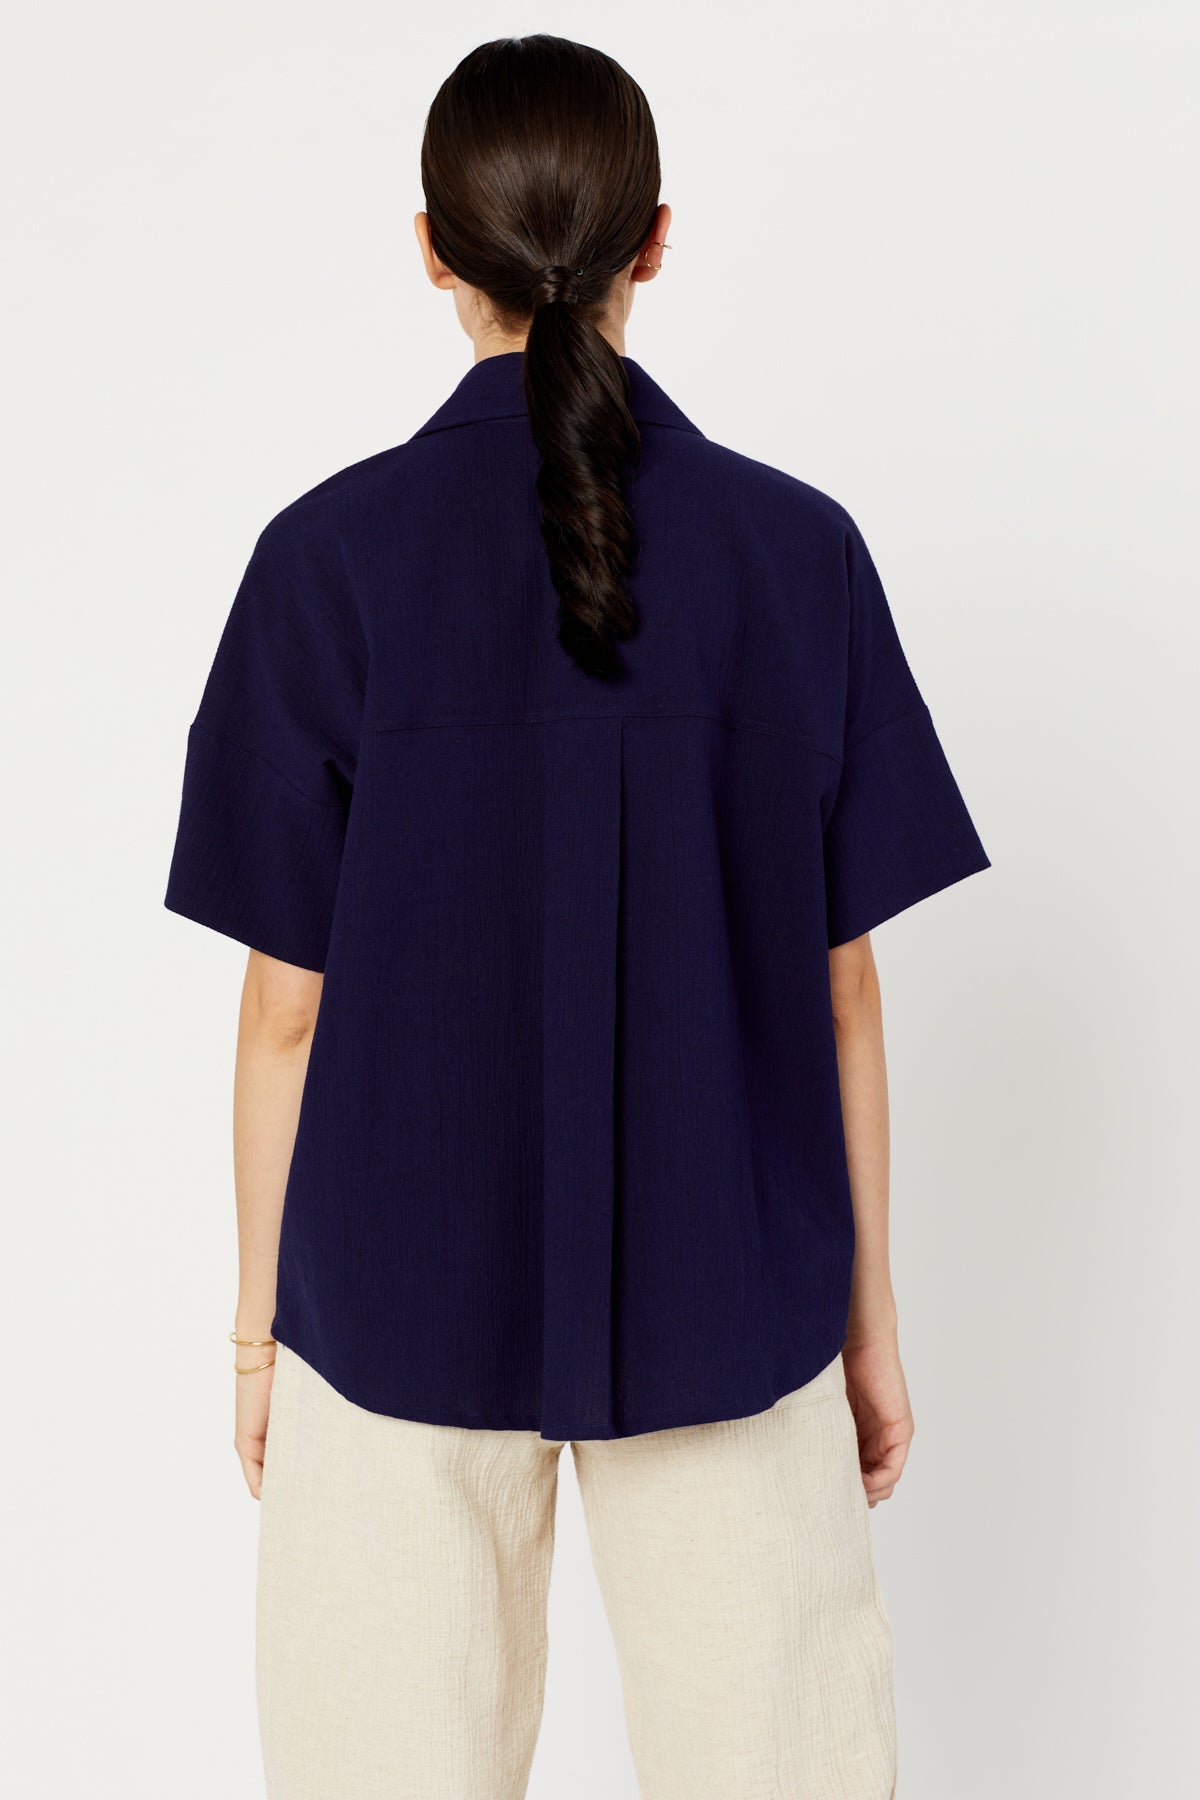 Kass Blouse in Cotton Yoryu